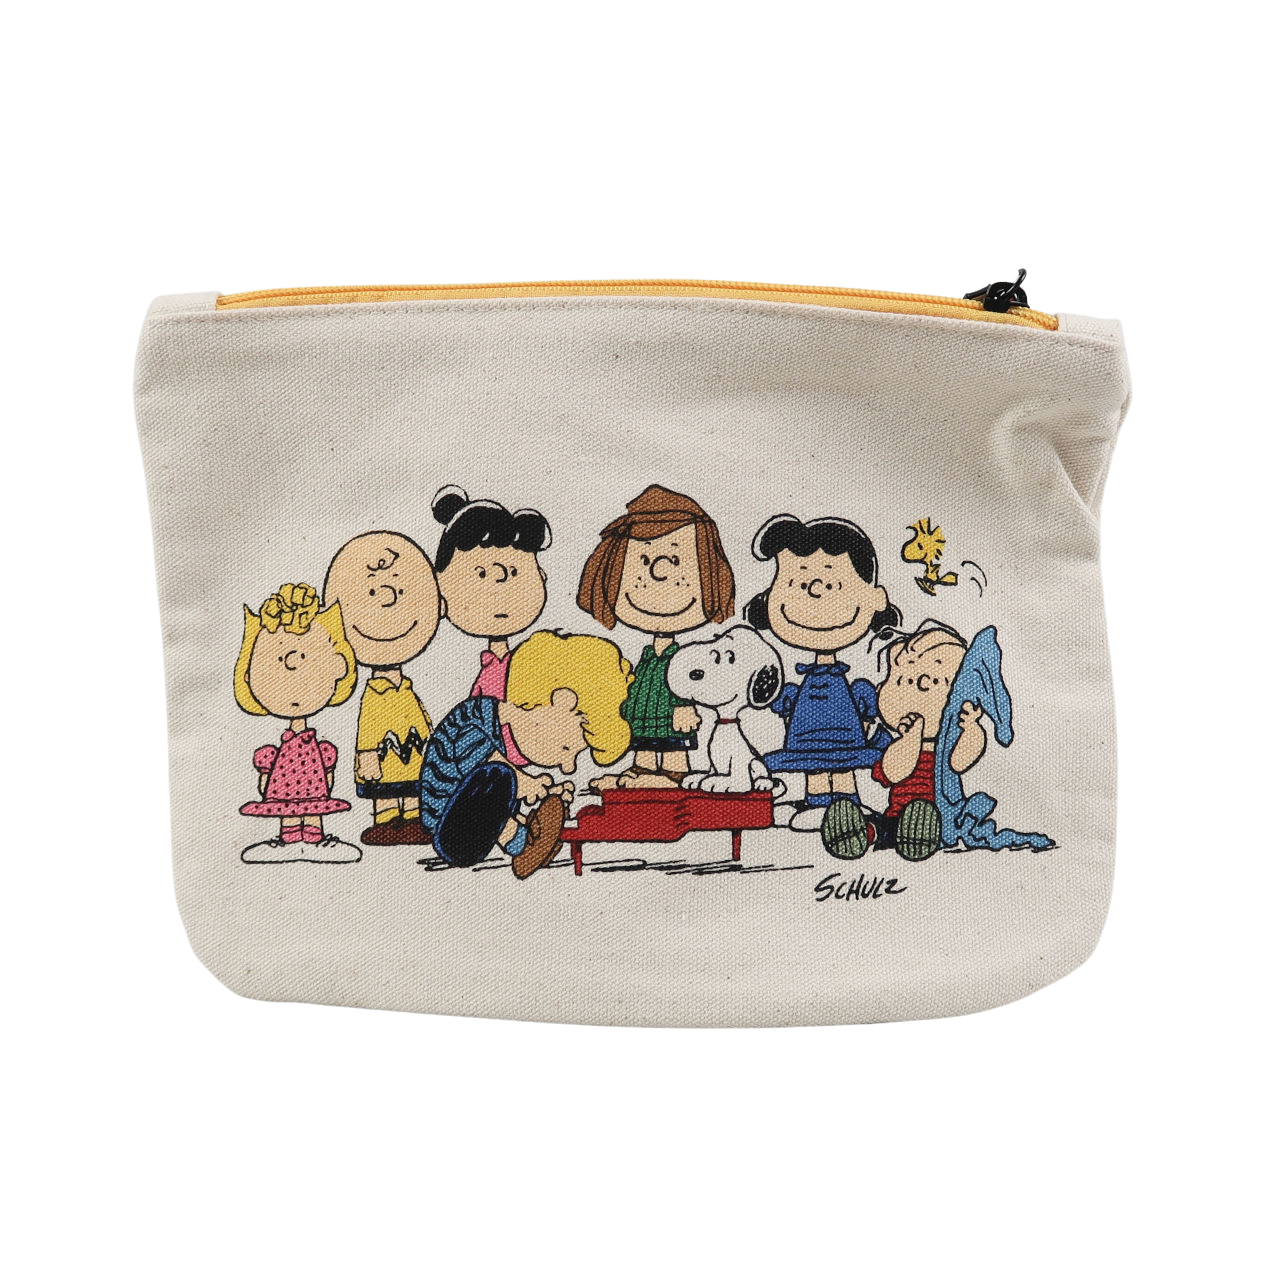 Peanuts Peanuts Gang & House Pouch